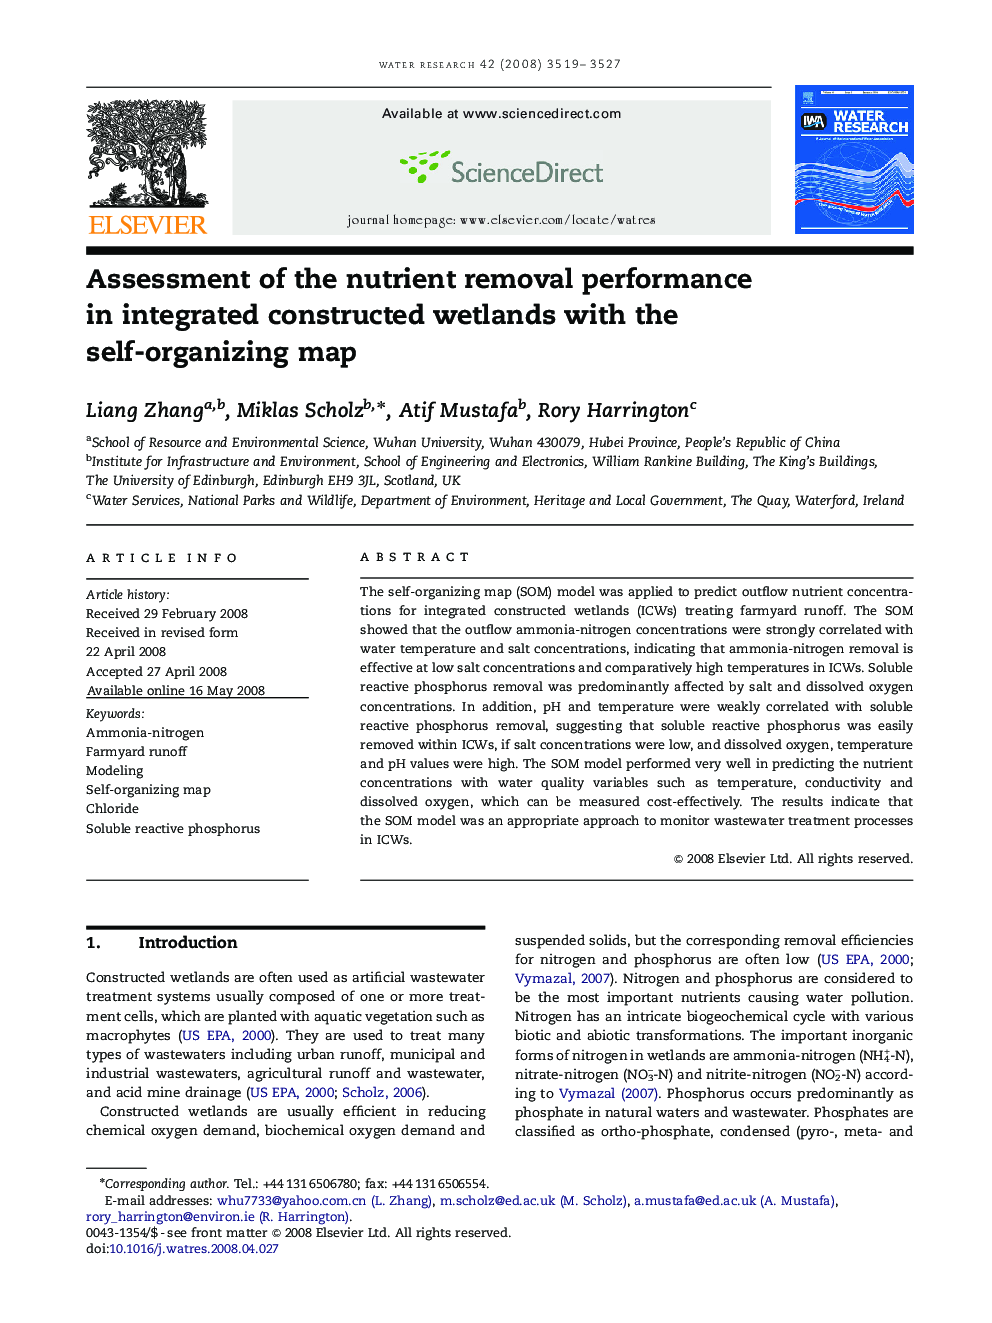 Assessment of the nutrient removal performance in integrated constructed wetlands with the self-organizing map